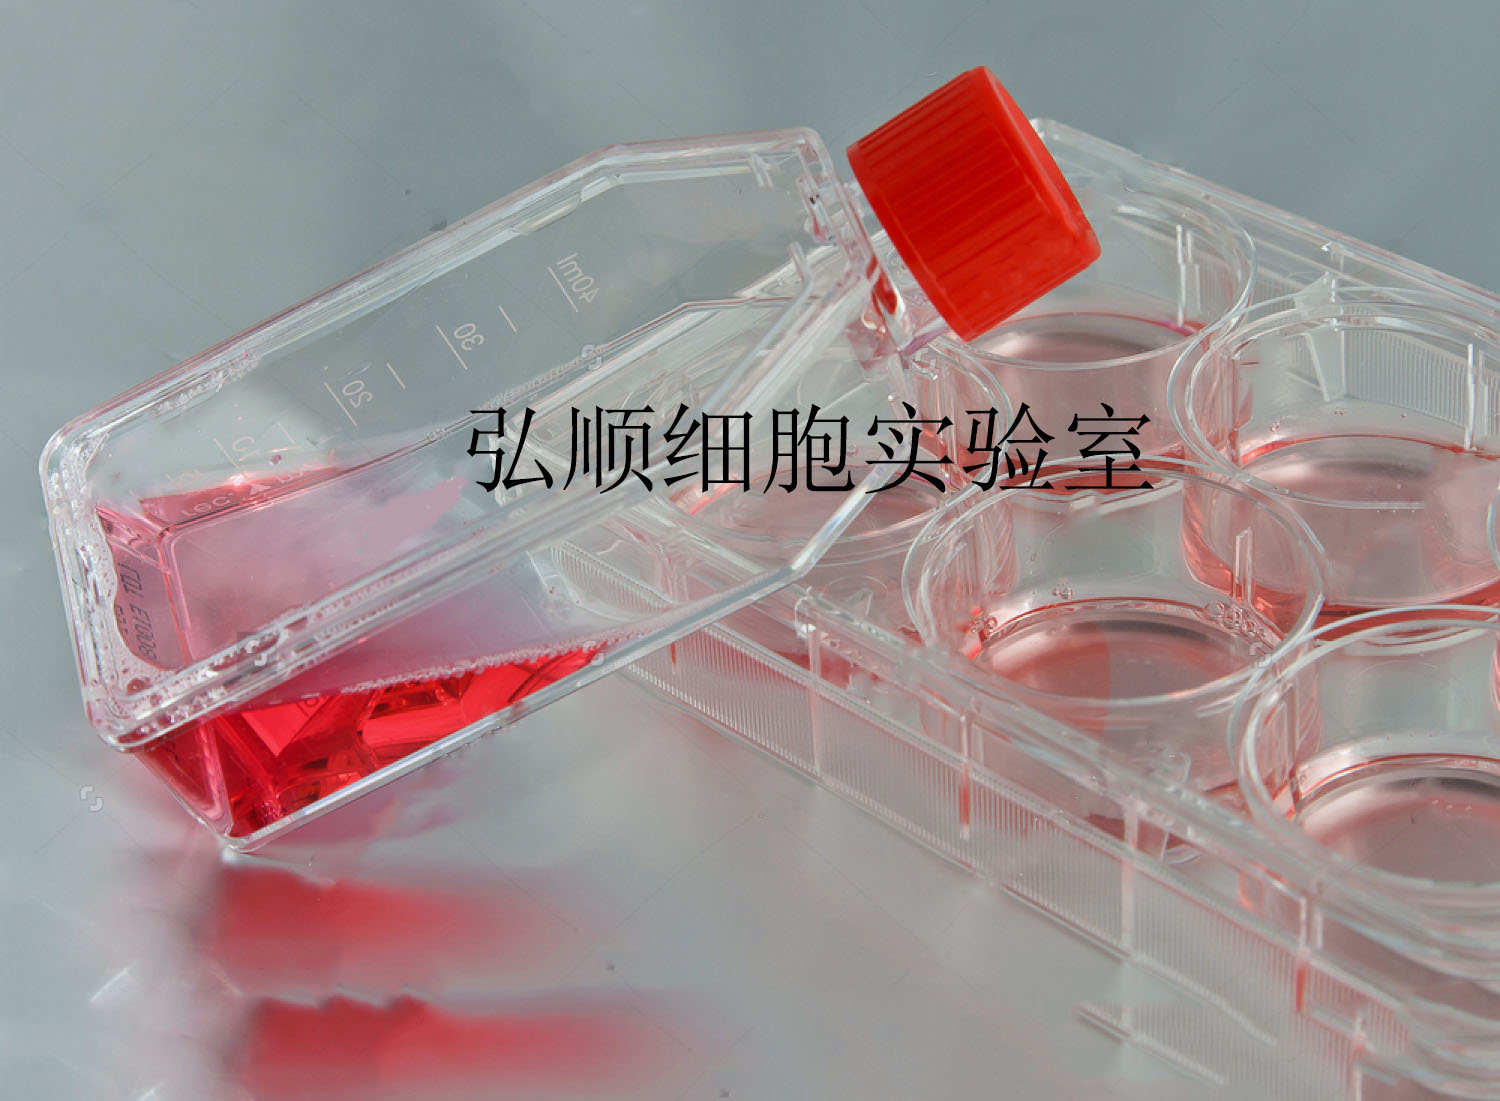 Co-115细胞：人结肠腺癌细胞,Co-115 Cell